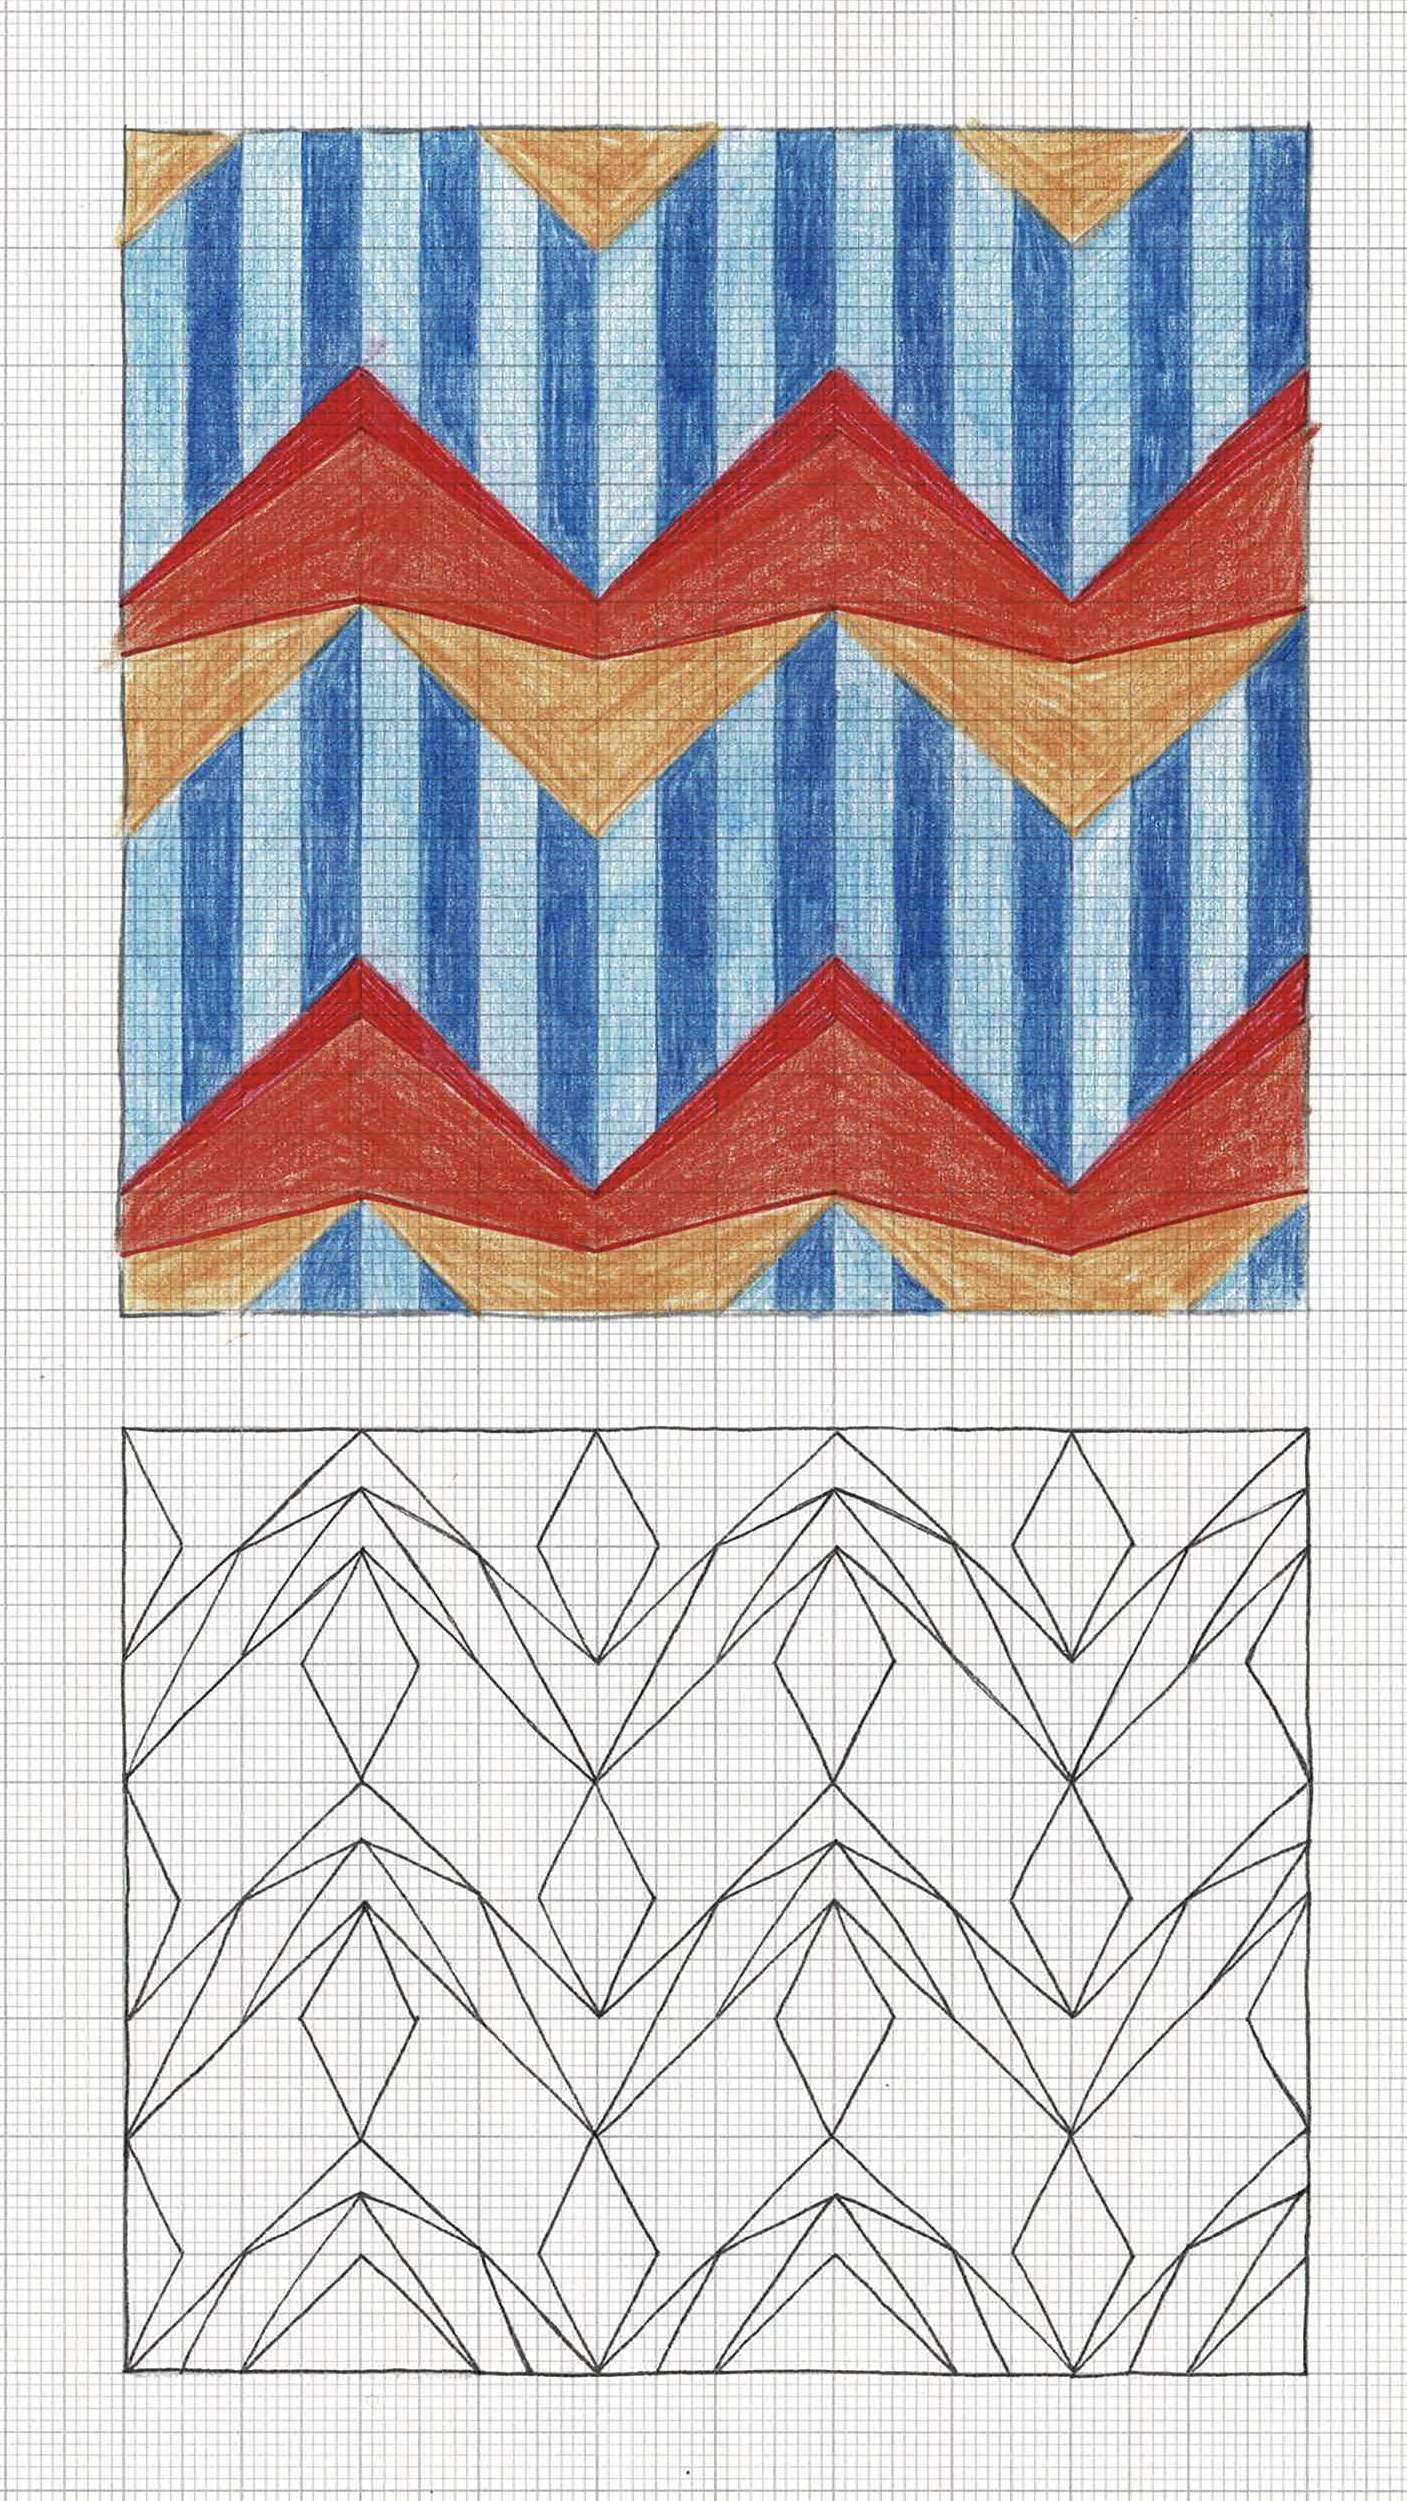 Repeat pattern, fineliner and coloured pencils, 2022.